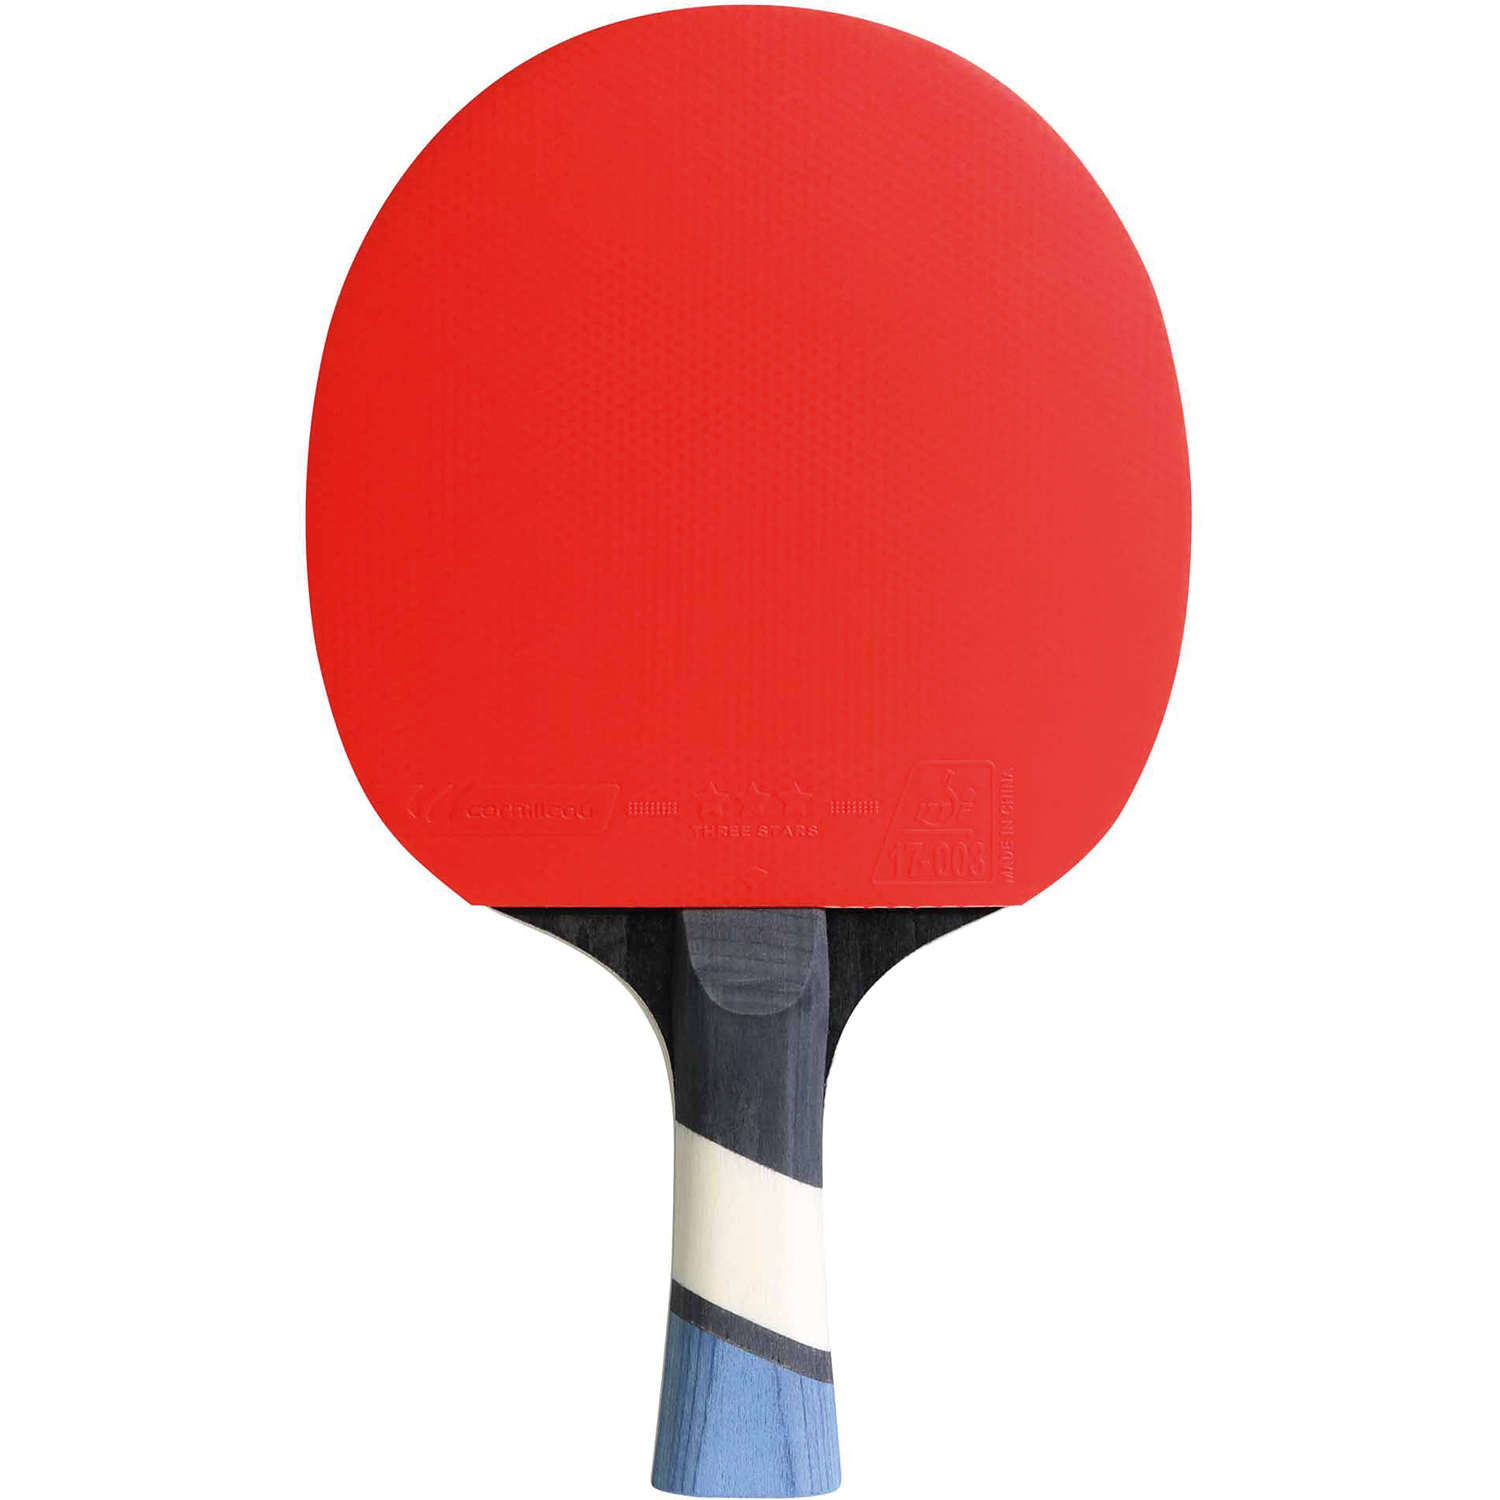 Raquete Ping Pong Cornilleau Perform 500